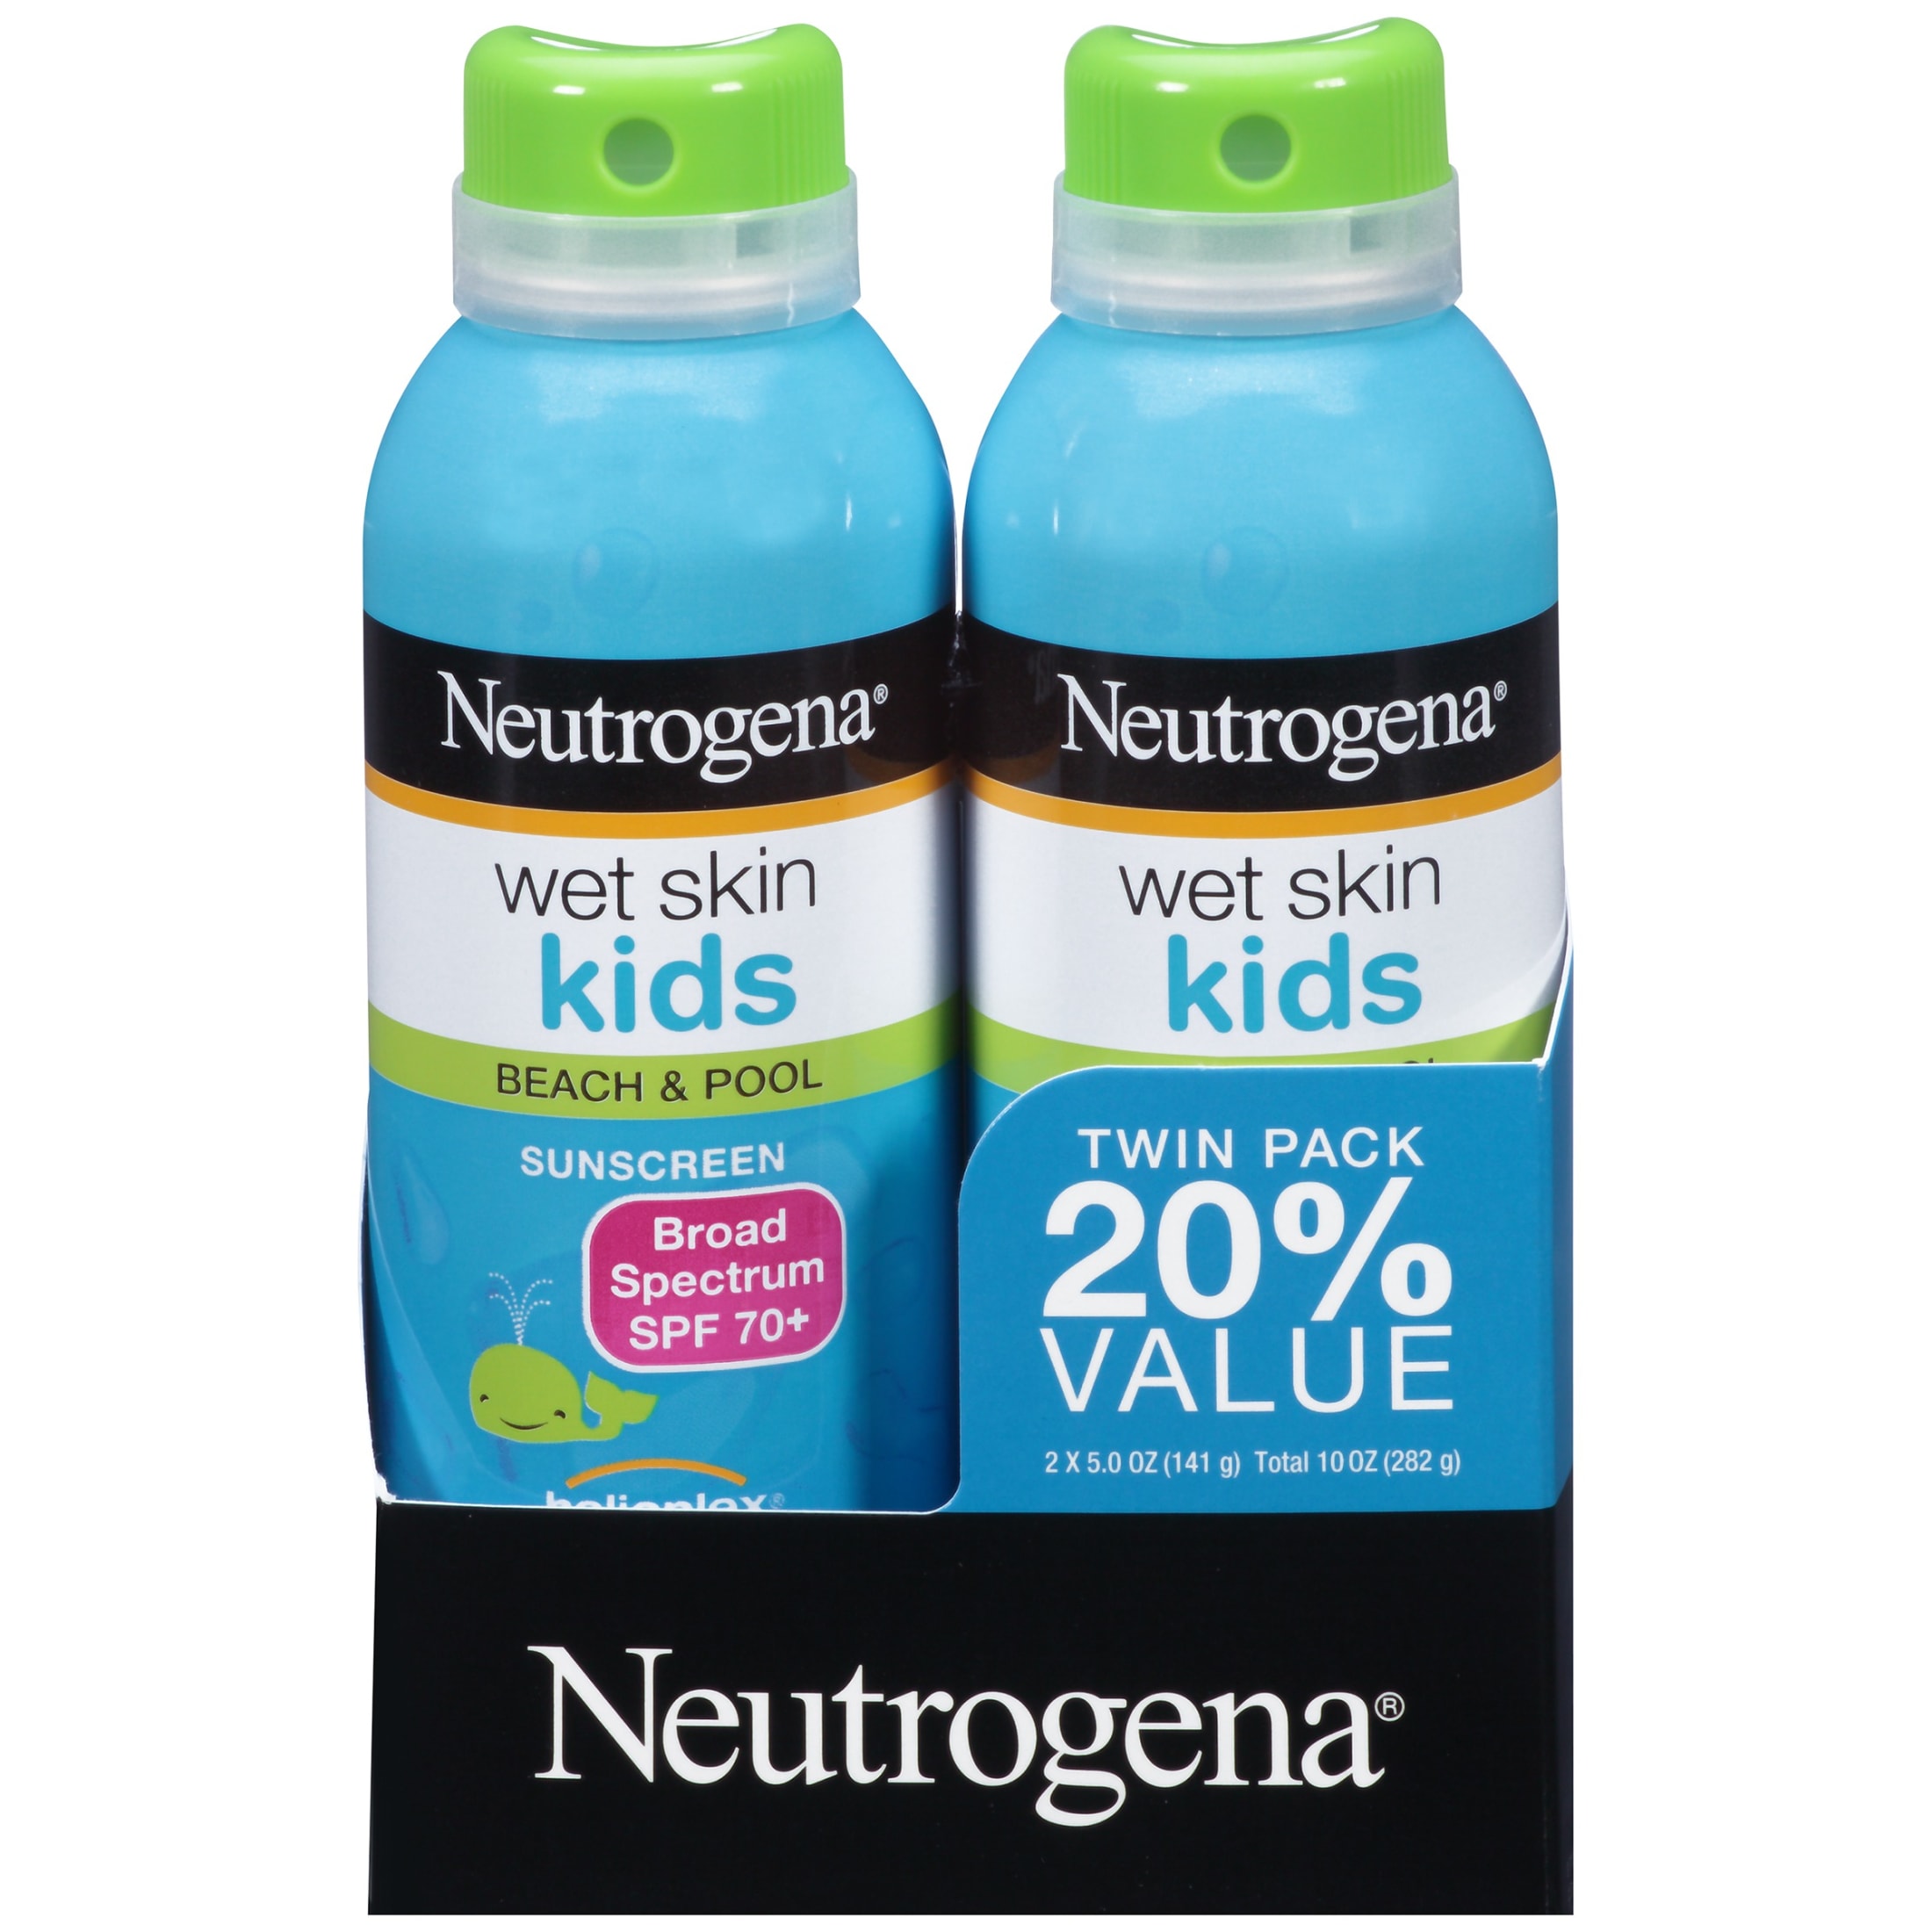 Neutrogena Kids Water-Resistant Sunscreen Spray SPF 70, Oil-Free, 5 oz, Twin Pack - image 1 of 7